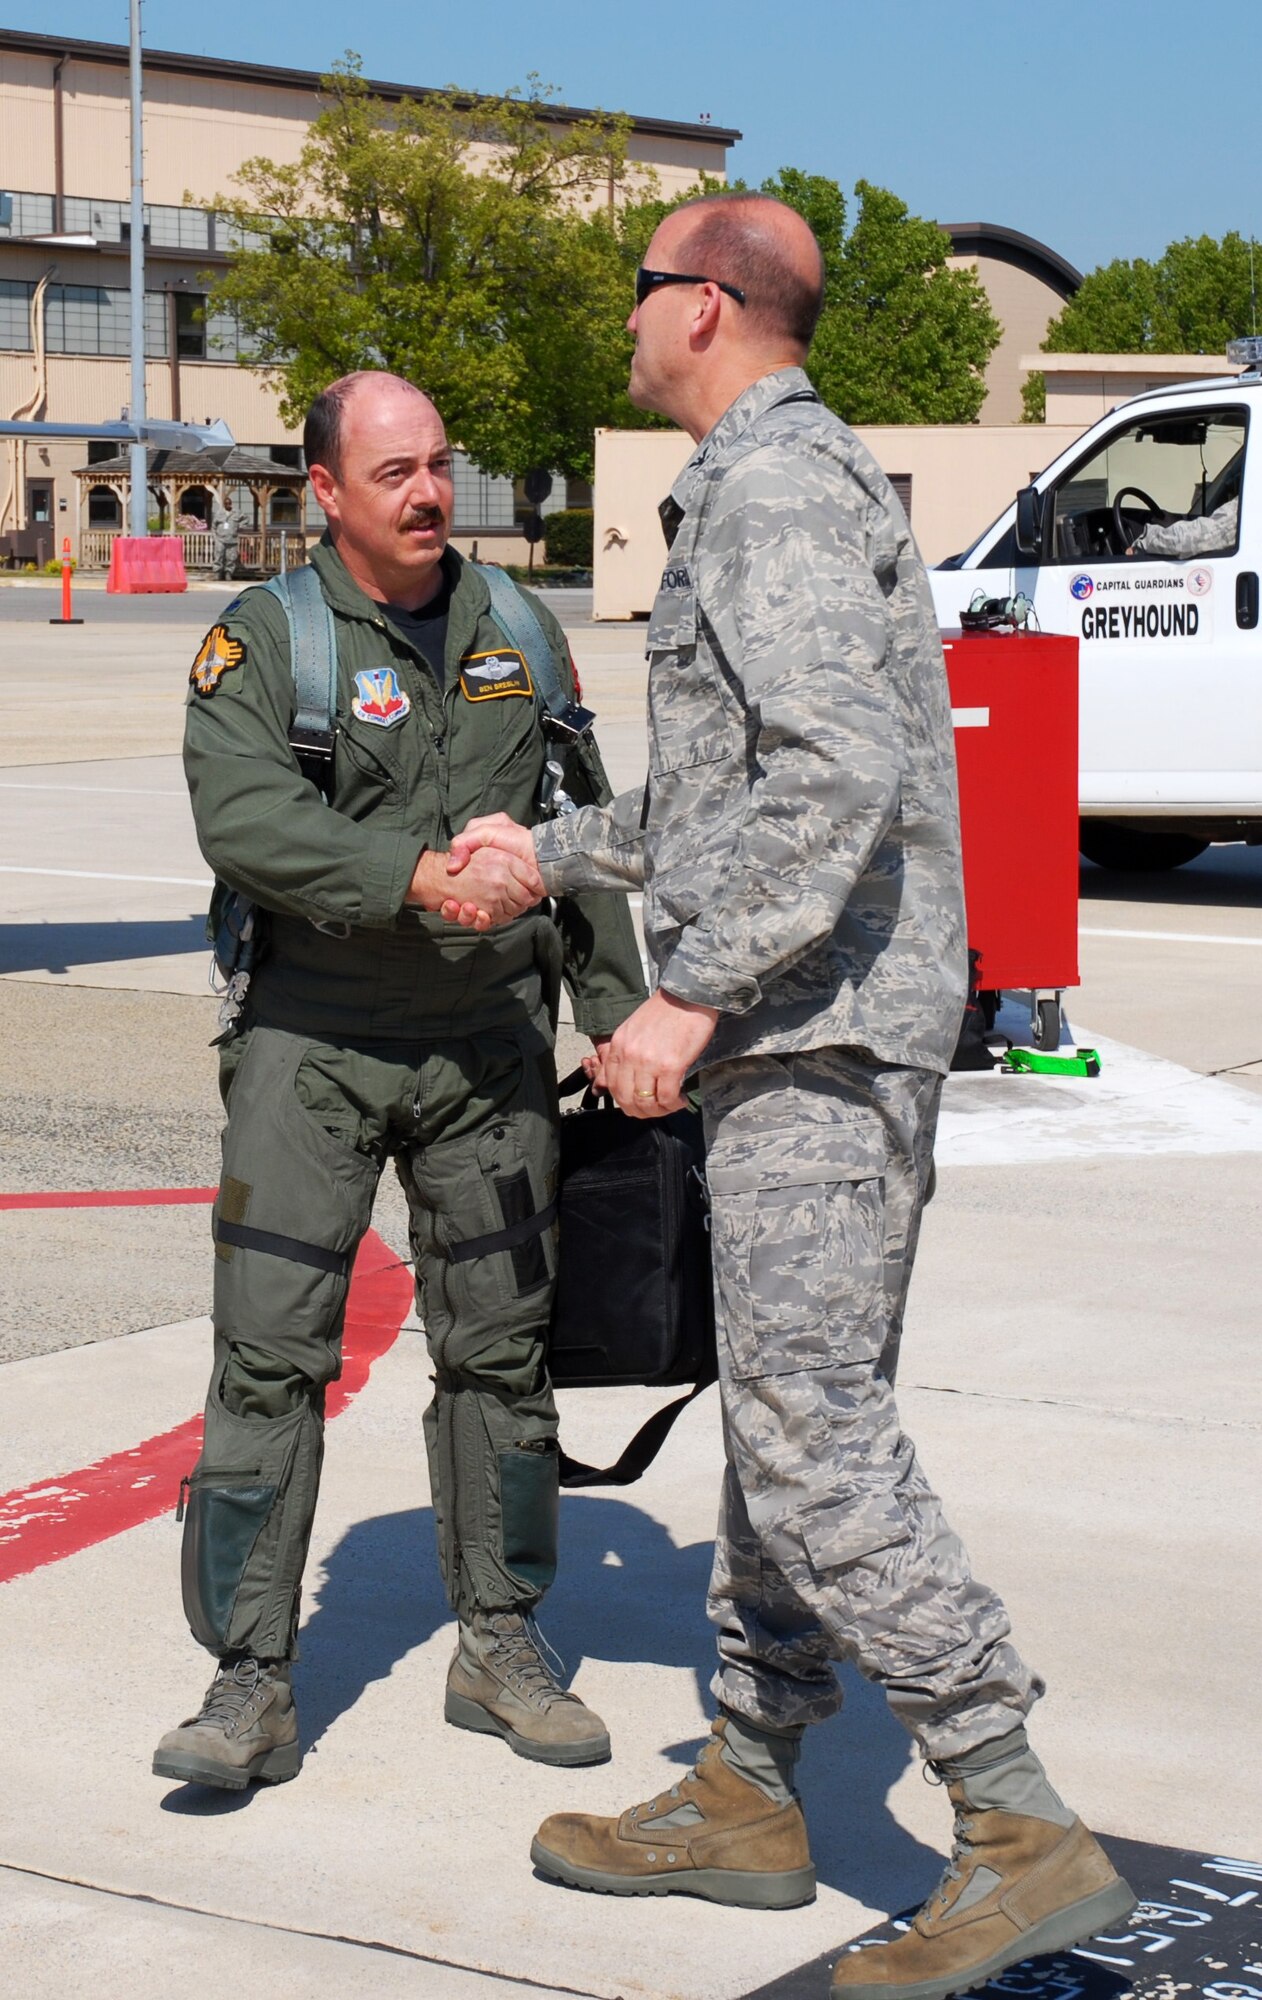 Col. Andrew Donnelly, 113WG Maintenance Group Commander, greets Lt. Col. Ben Breslin, New Mexico Air National Guard, who delivered a newer F-16 from New Mexico to its new home with the DC Air National Guard, April 15. (U.S. Air Force photo by Tech. Sgt Tyrell Heaton/Released)